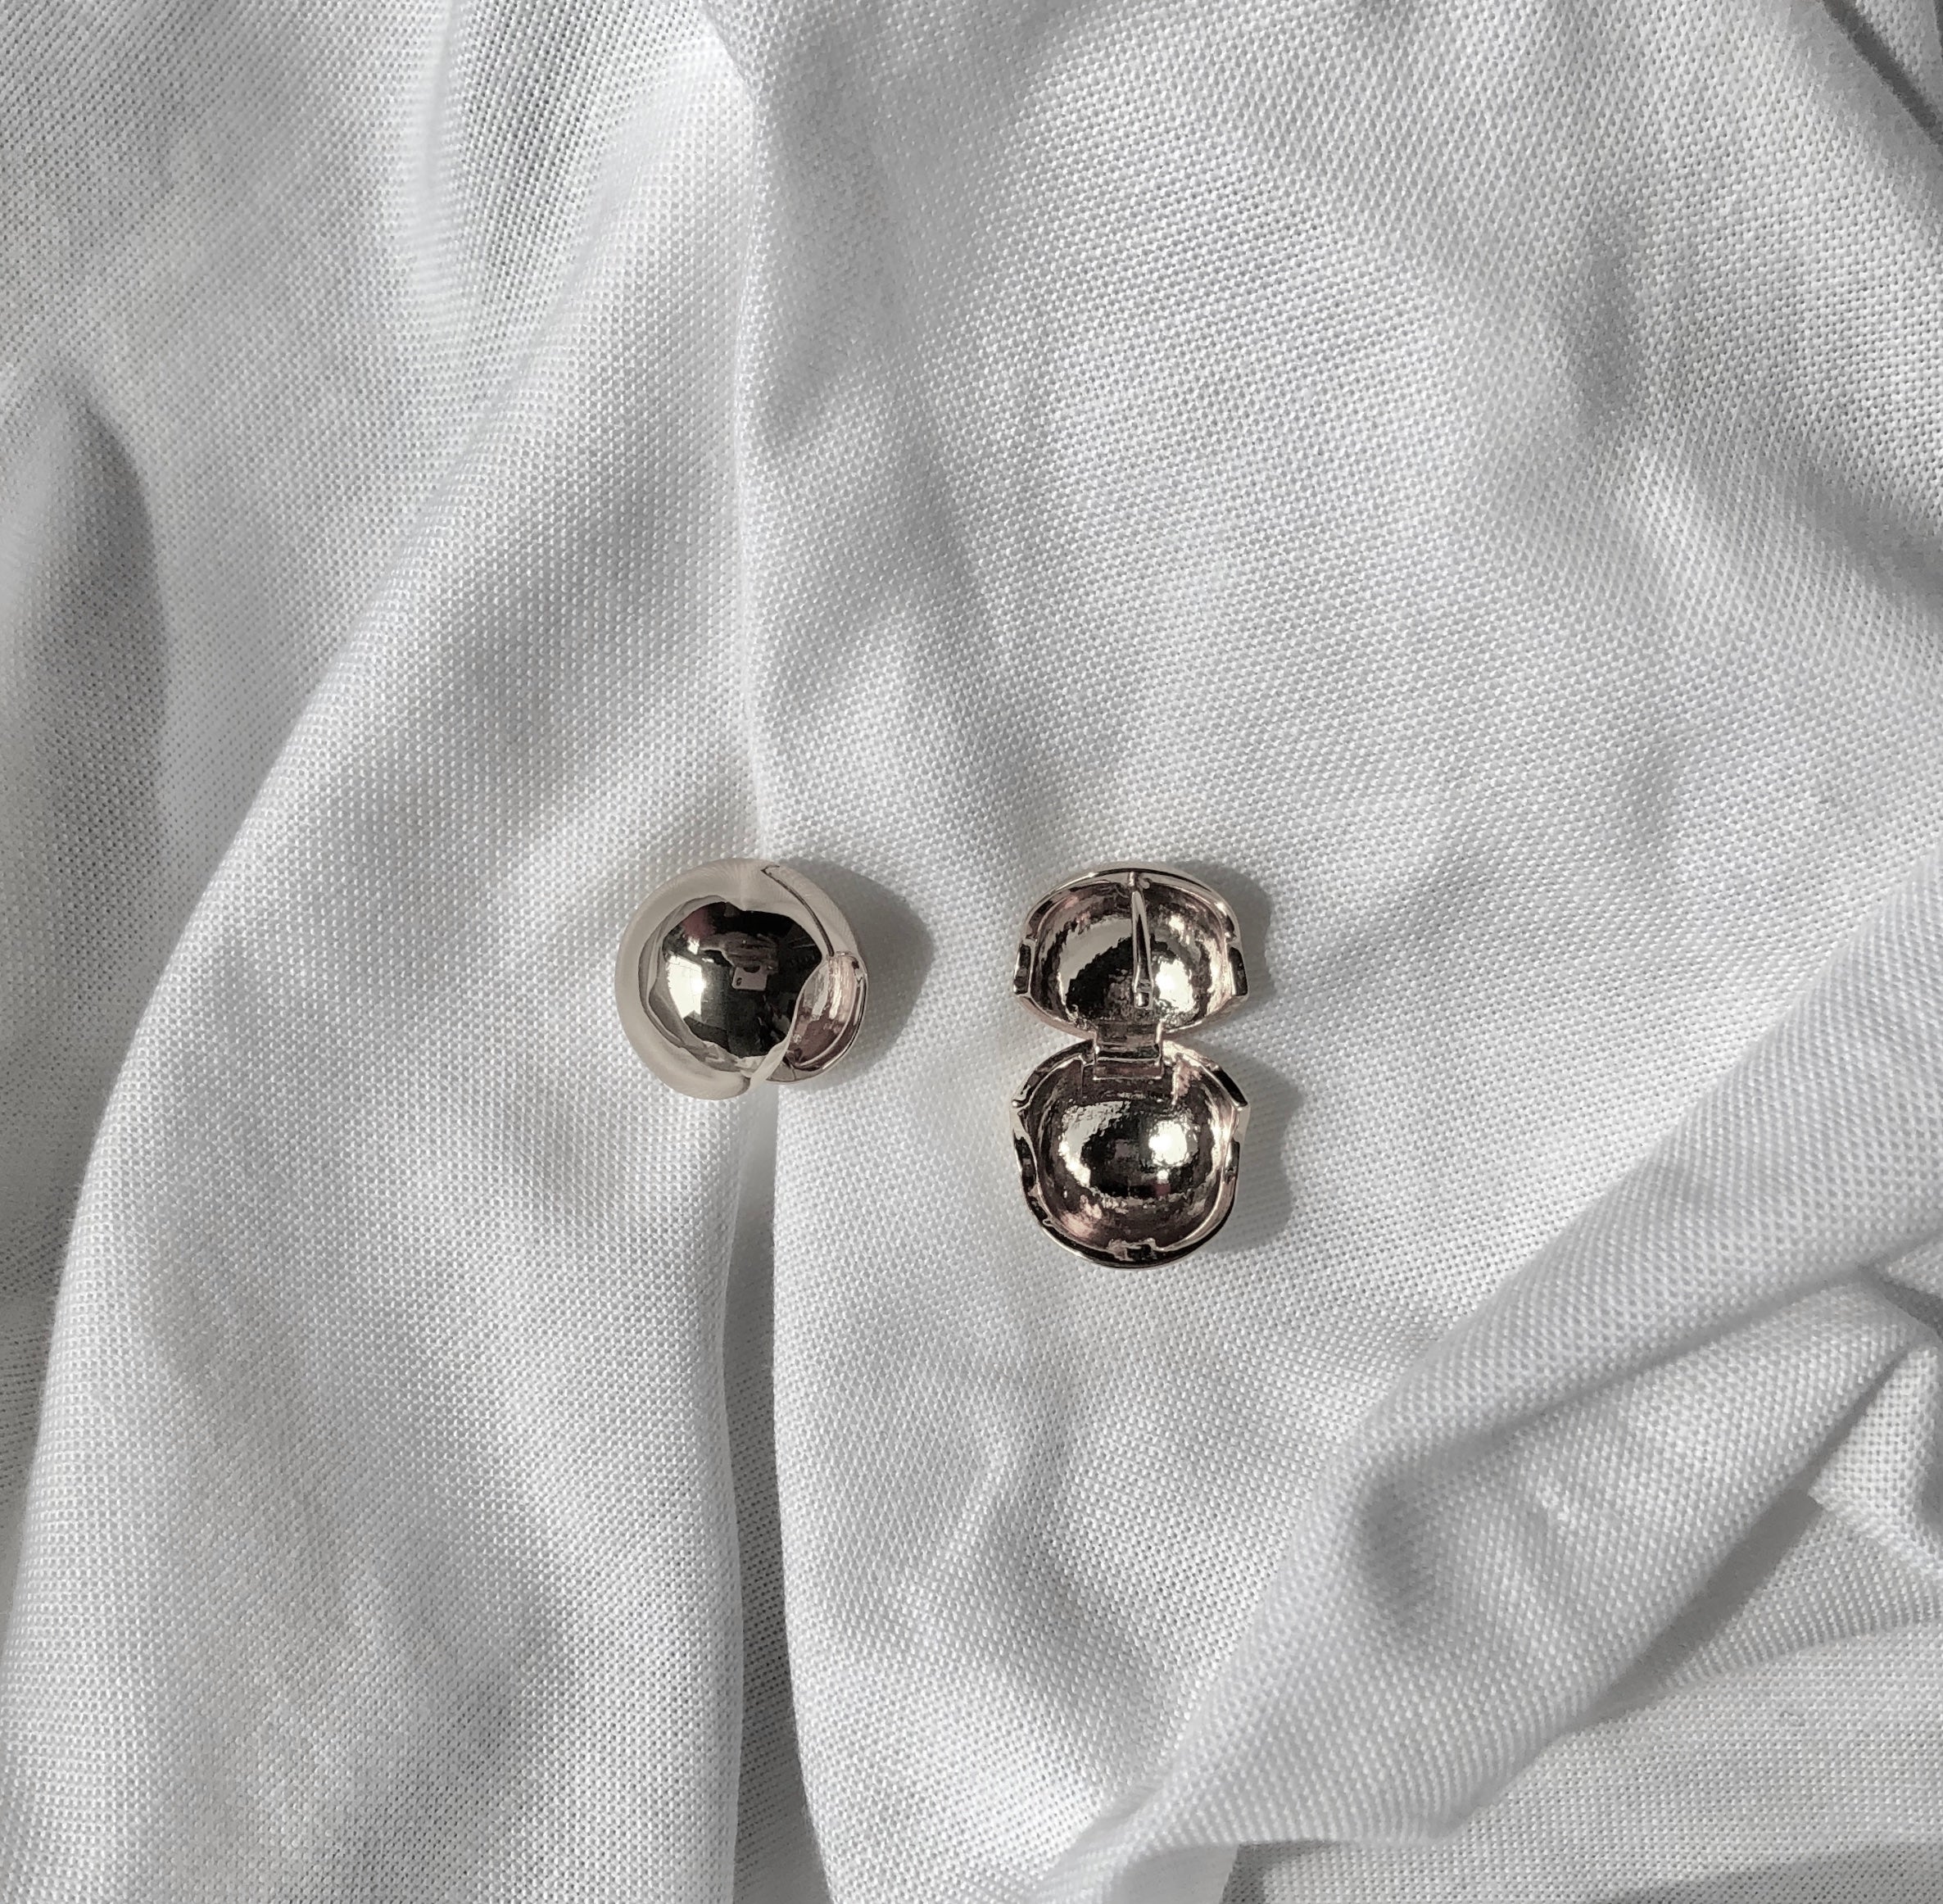 Ball Earrings in 925 Silver by Veronique